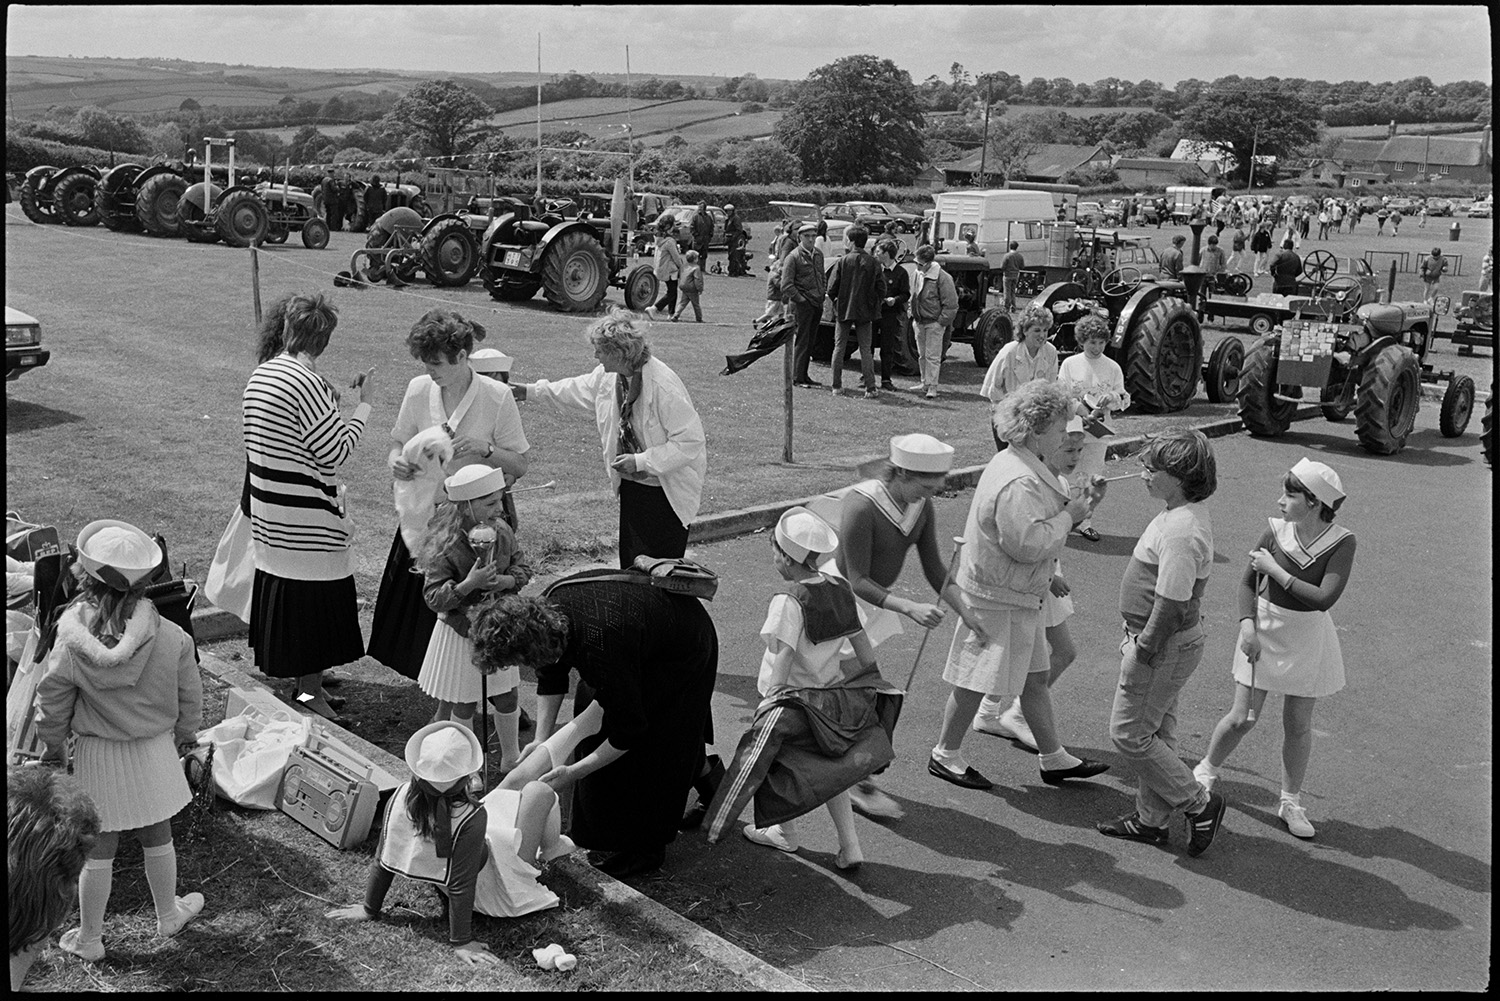 School fete, drum majorettes competition, early tractor display, mothers and children.
[People gathered in a field for the Chulmleigh School Fete. A group of majorettes are getting reading in the foreground and a display of vintage tractors is visible in the background.]